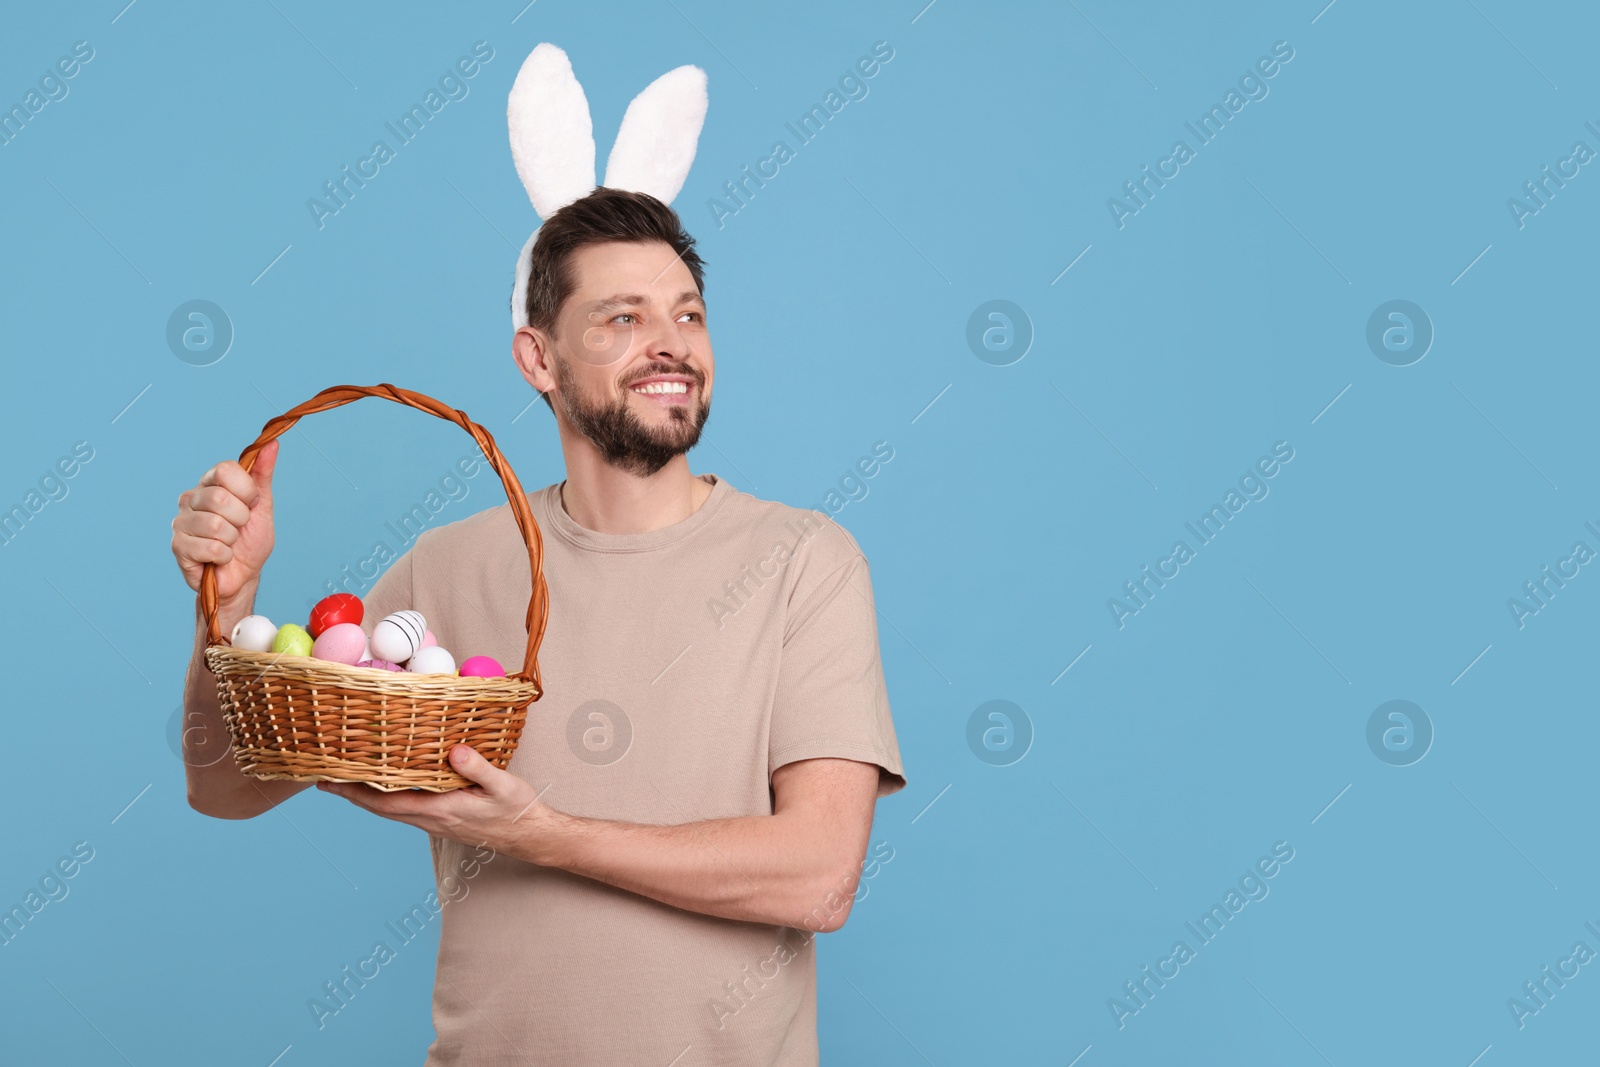 Photo of Happy man in bunny ears headband holding wicker basket with painted Easter eggs on turquoise background. Space for text